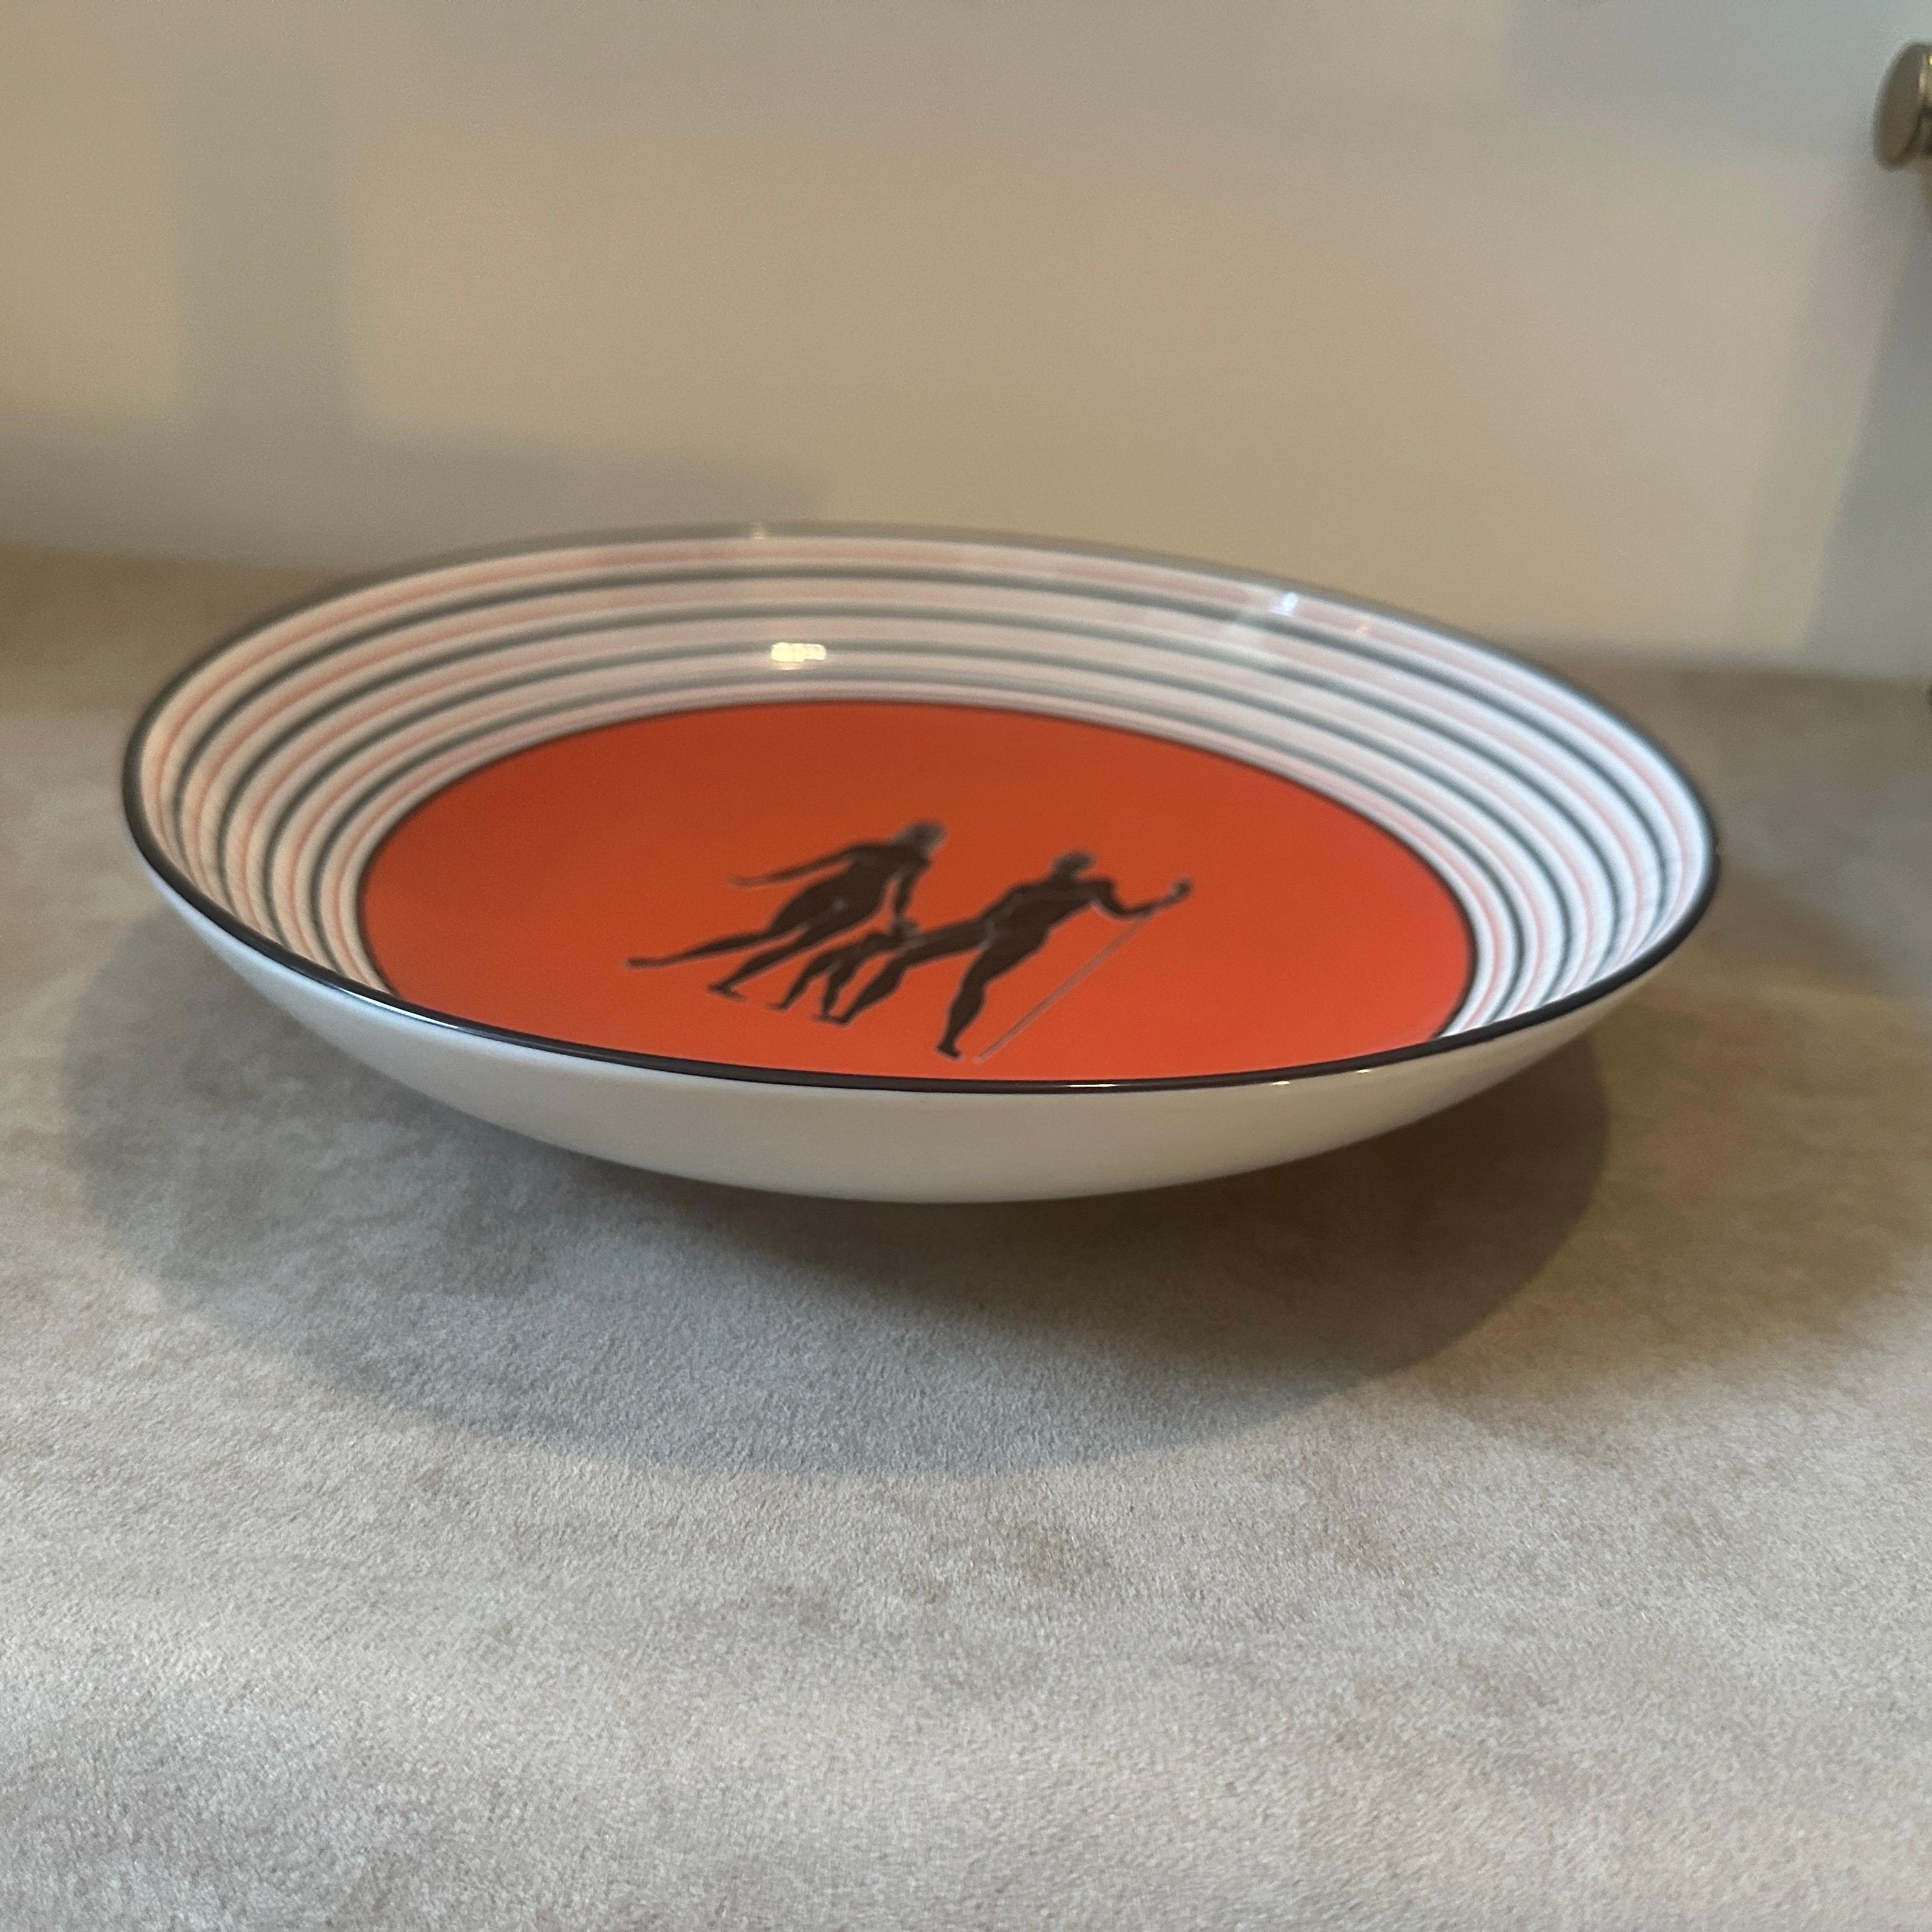 Hand-Painted An Art Deco Style Porcelain Round Bowl Designed by Gio Ponti for Richard Ginori For Sale